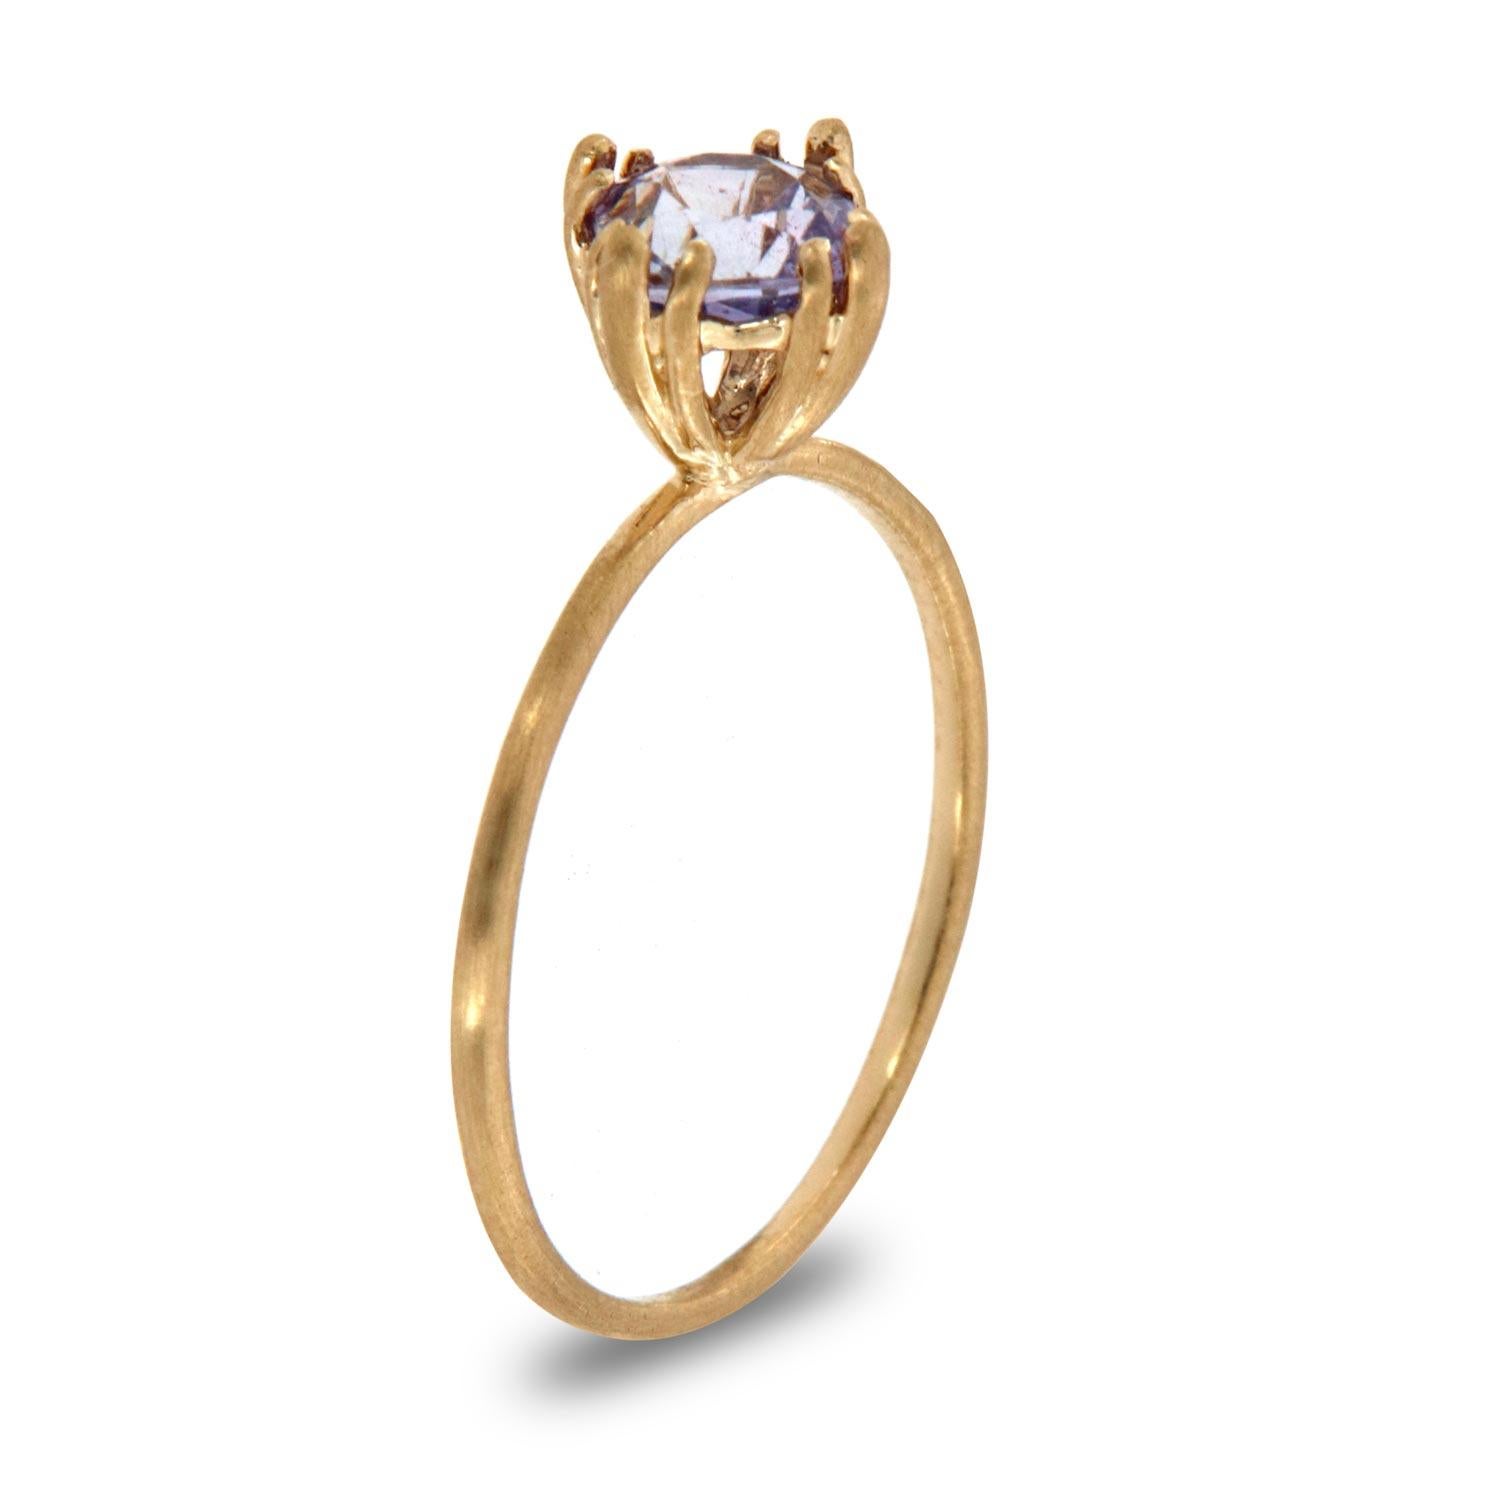 This petite rustic style ring is impressive in its Organic appeal, featuring a natural light lavender blue square cushion sapphire set in a delicate 12 prongs basket. Experience the difference in person!

Product details: 

Center Gemstone Type: